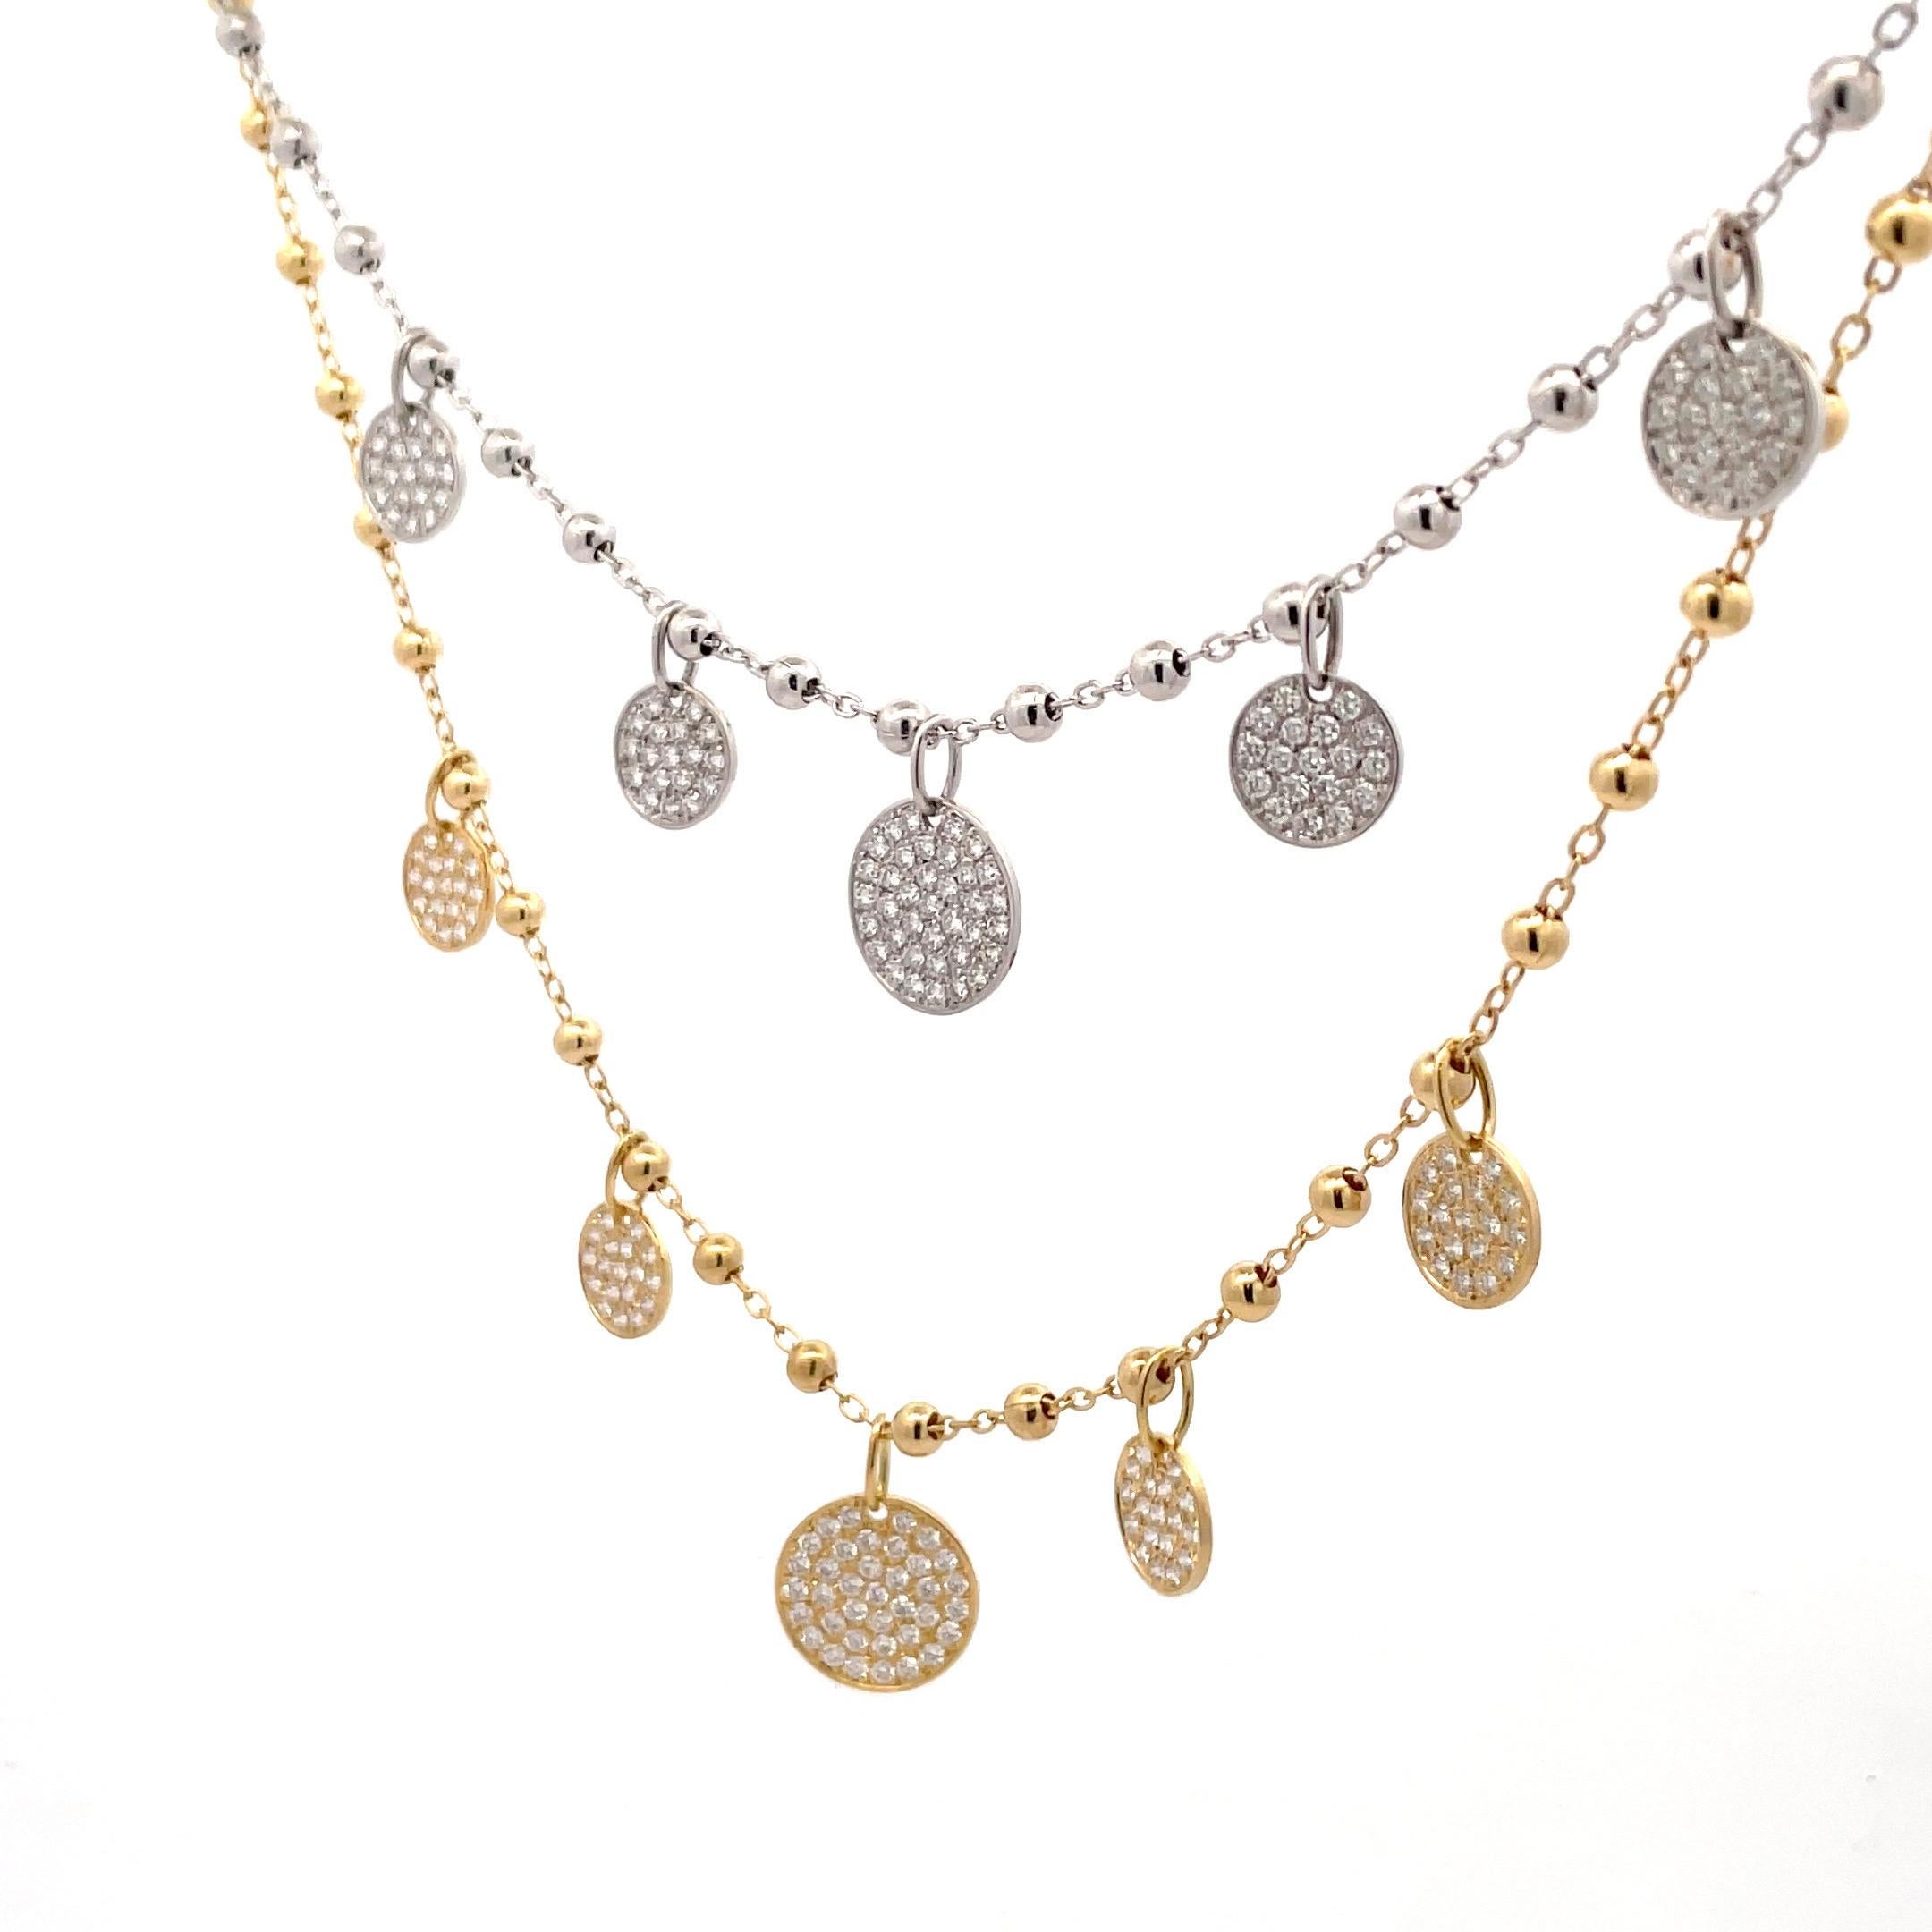 18 Karat Yellow or White Gold necklace featuring graduated diamond disc weighing 1.12 Carats on a beaded chain. 
Color F-G
Clarity SI
More Charm Necklaces Available 
Comes in white, yellow or rose.
Pirie for one necklace